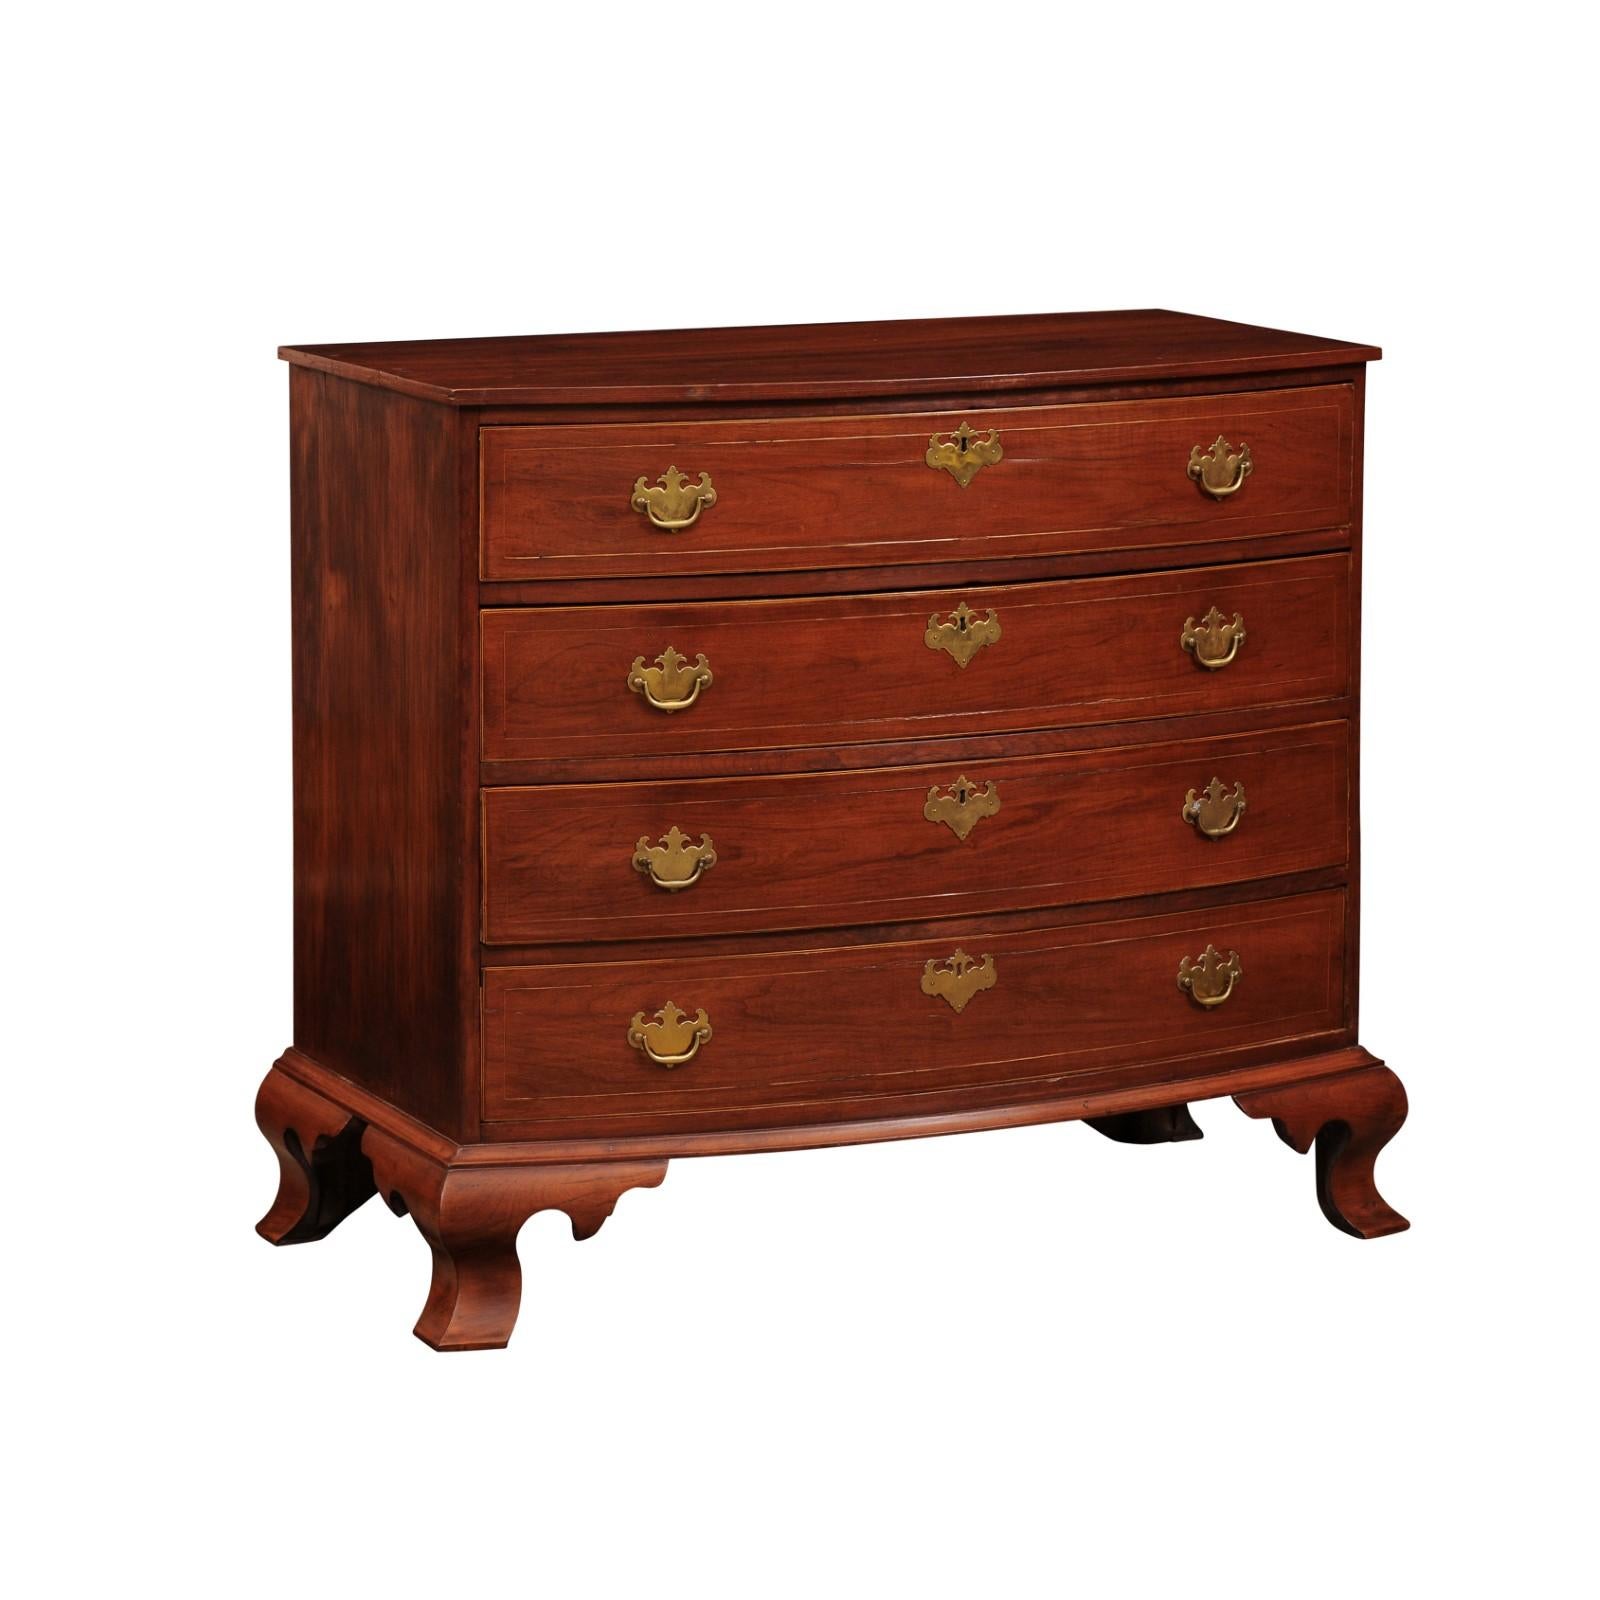 New England Cherry Bowfront Chest with Graduating 4 Drawers, String Inlay and Ogee Feet, ca. 1790